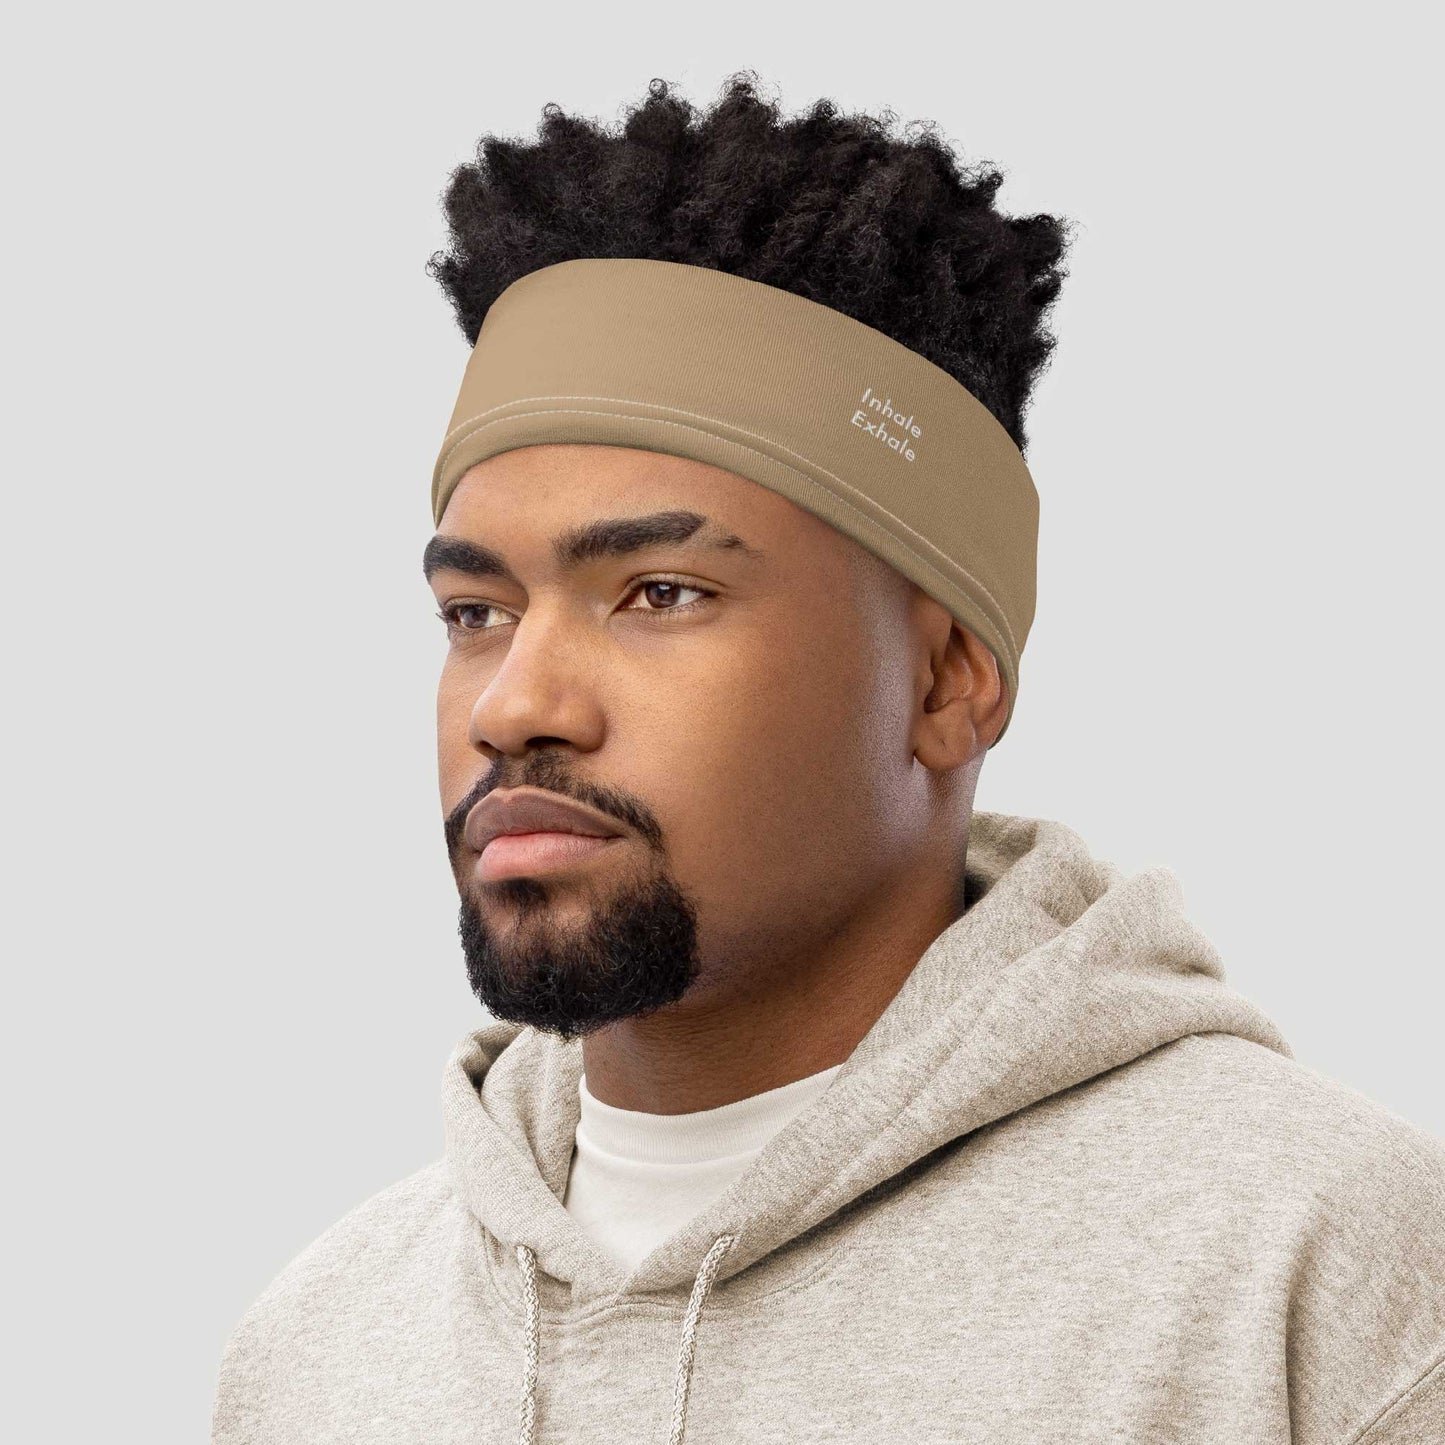 Man wearing an Inhale Exhale inspirational quote headband